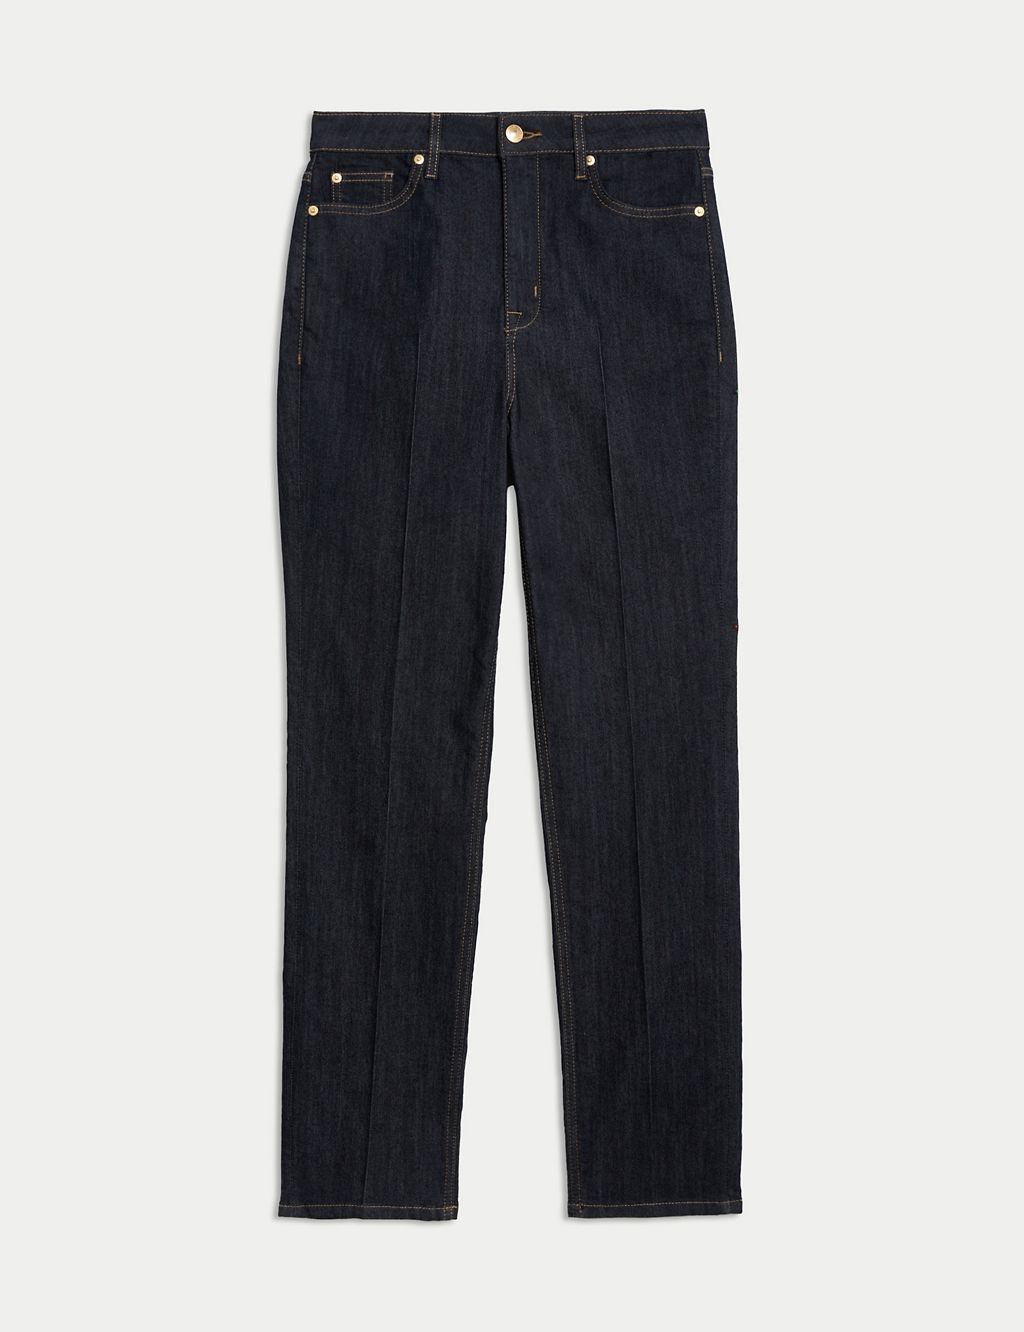 Sienna High Waisted Smart Jeans 1 of 8